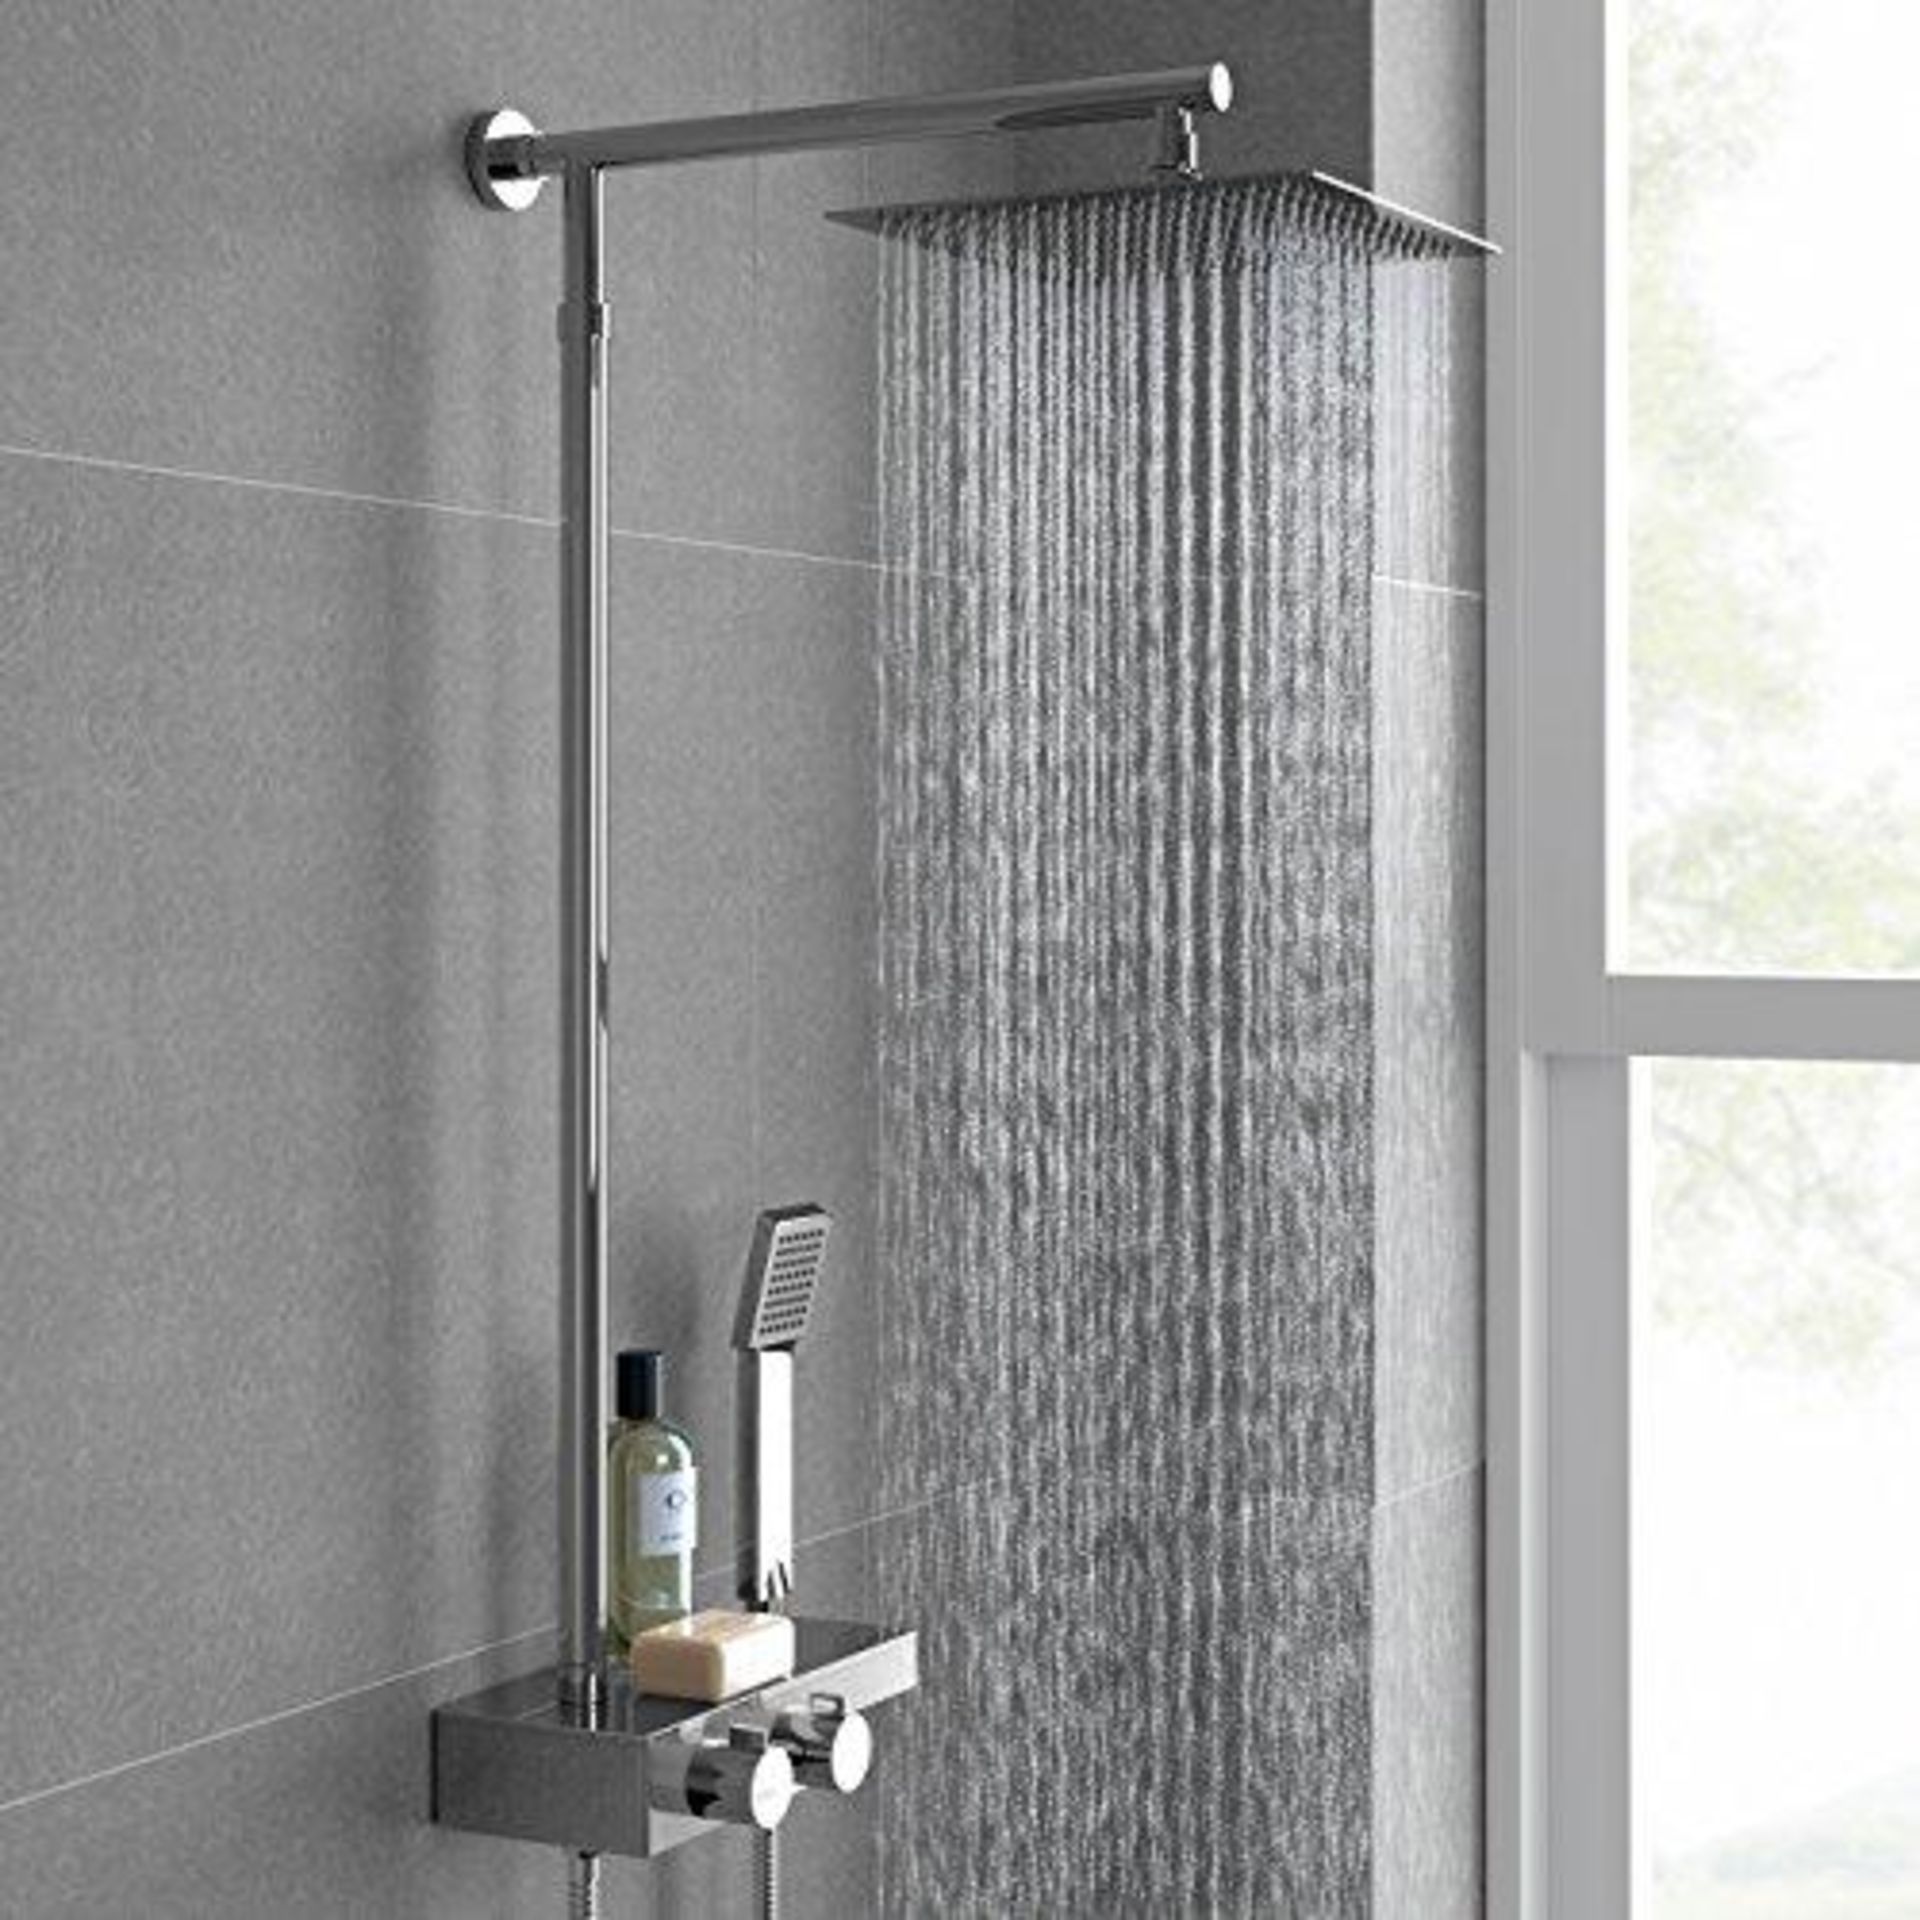 New & Boxed Square Thermostatic Bar Mixer Shower Set Valve With Shelf 10"" Head + Handset. Rrp ...